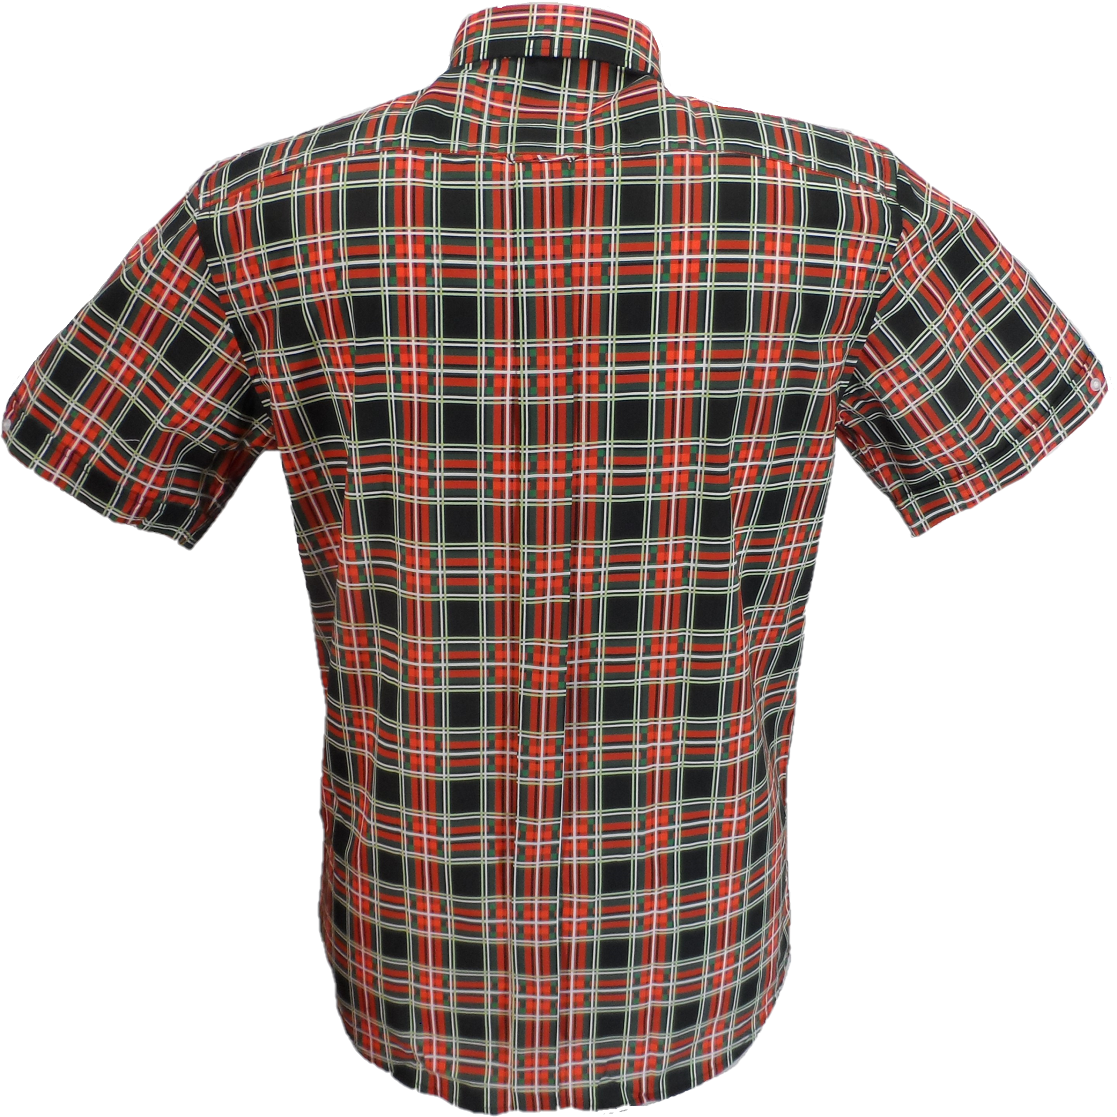 Mazeys Mens Black/Red Multi Checked 100% Cotton Short Sleeved Shirts